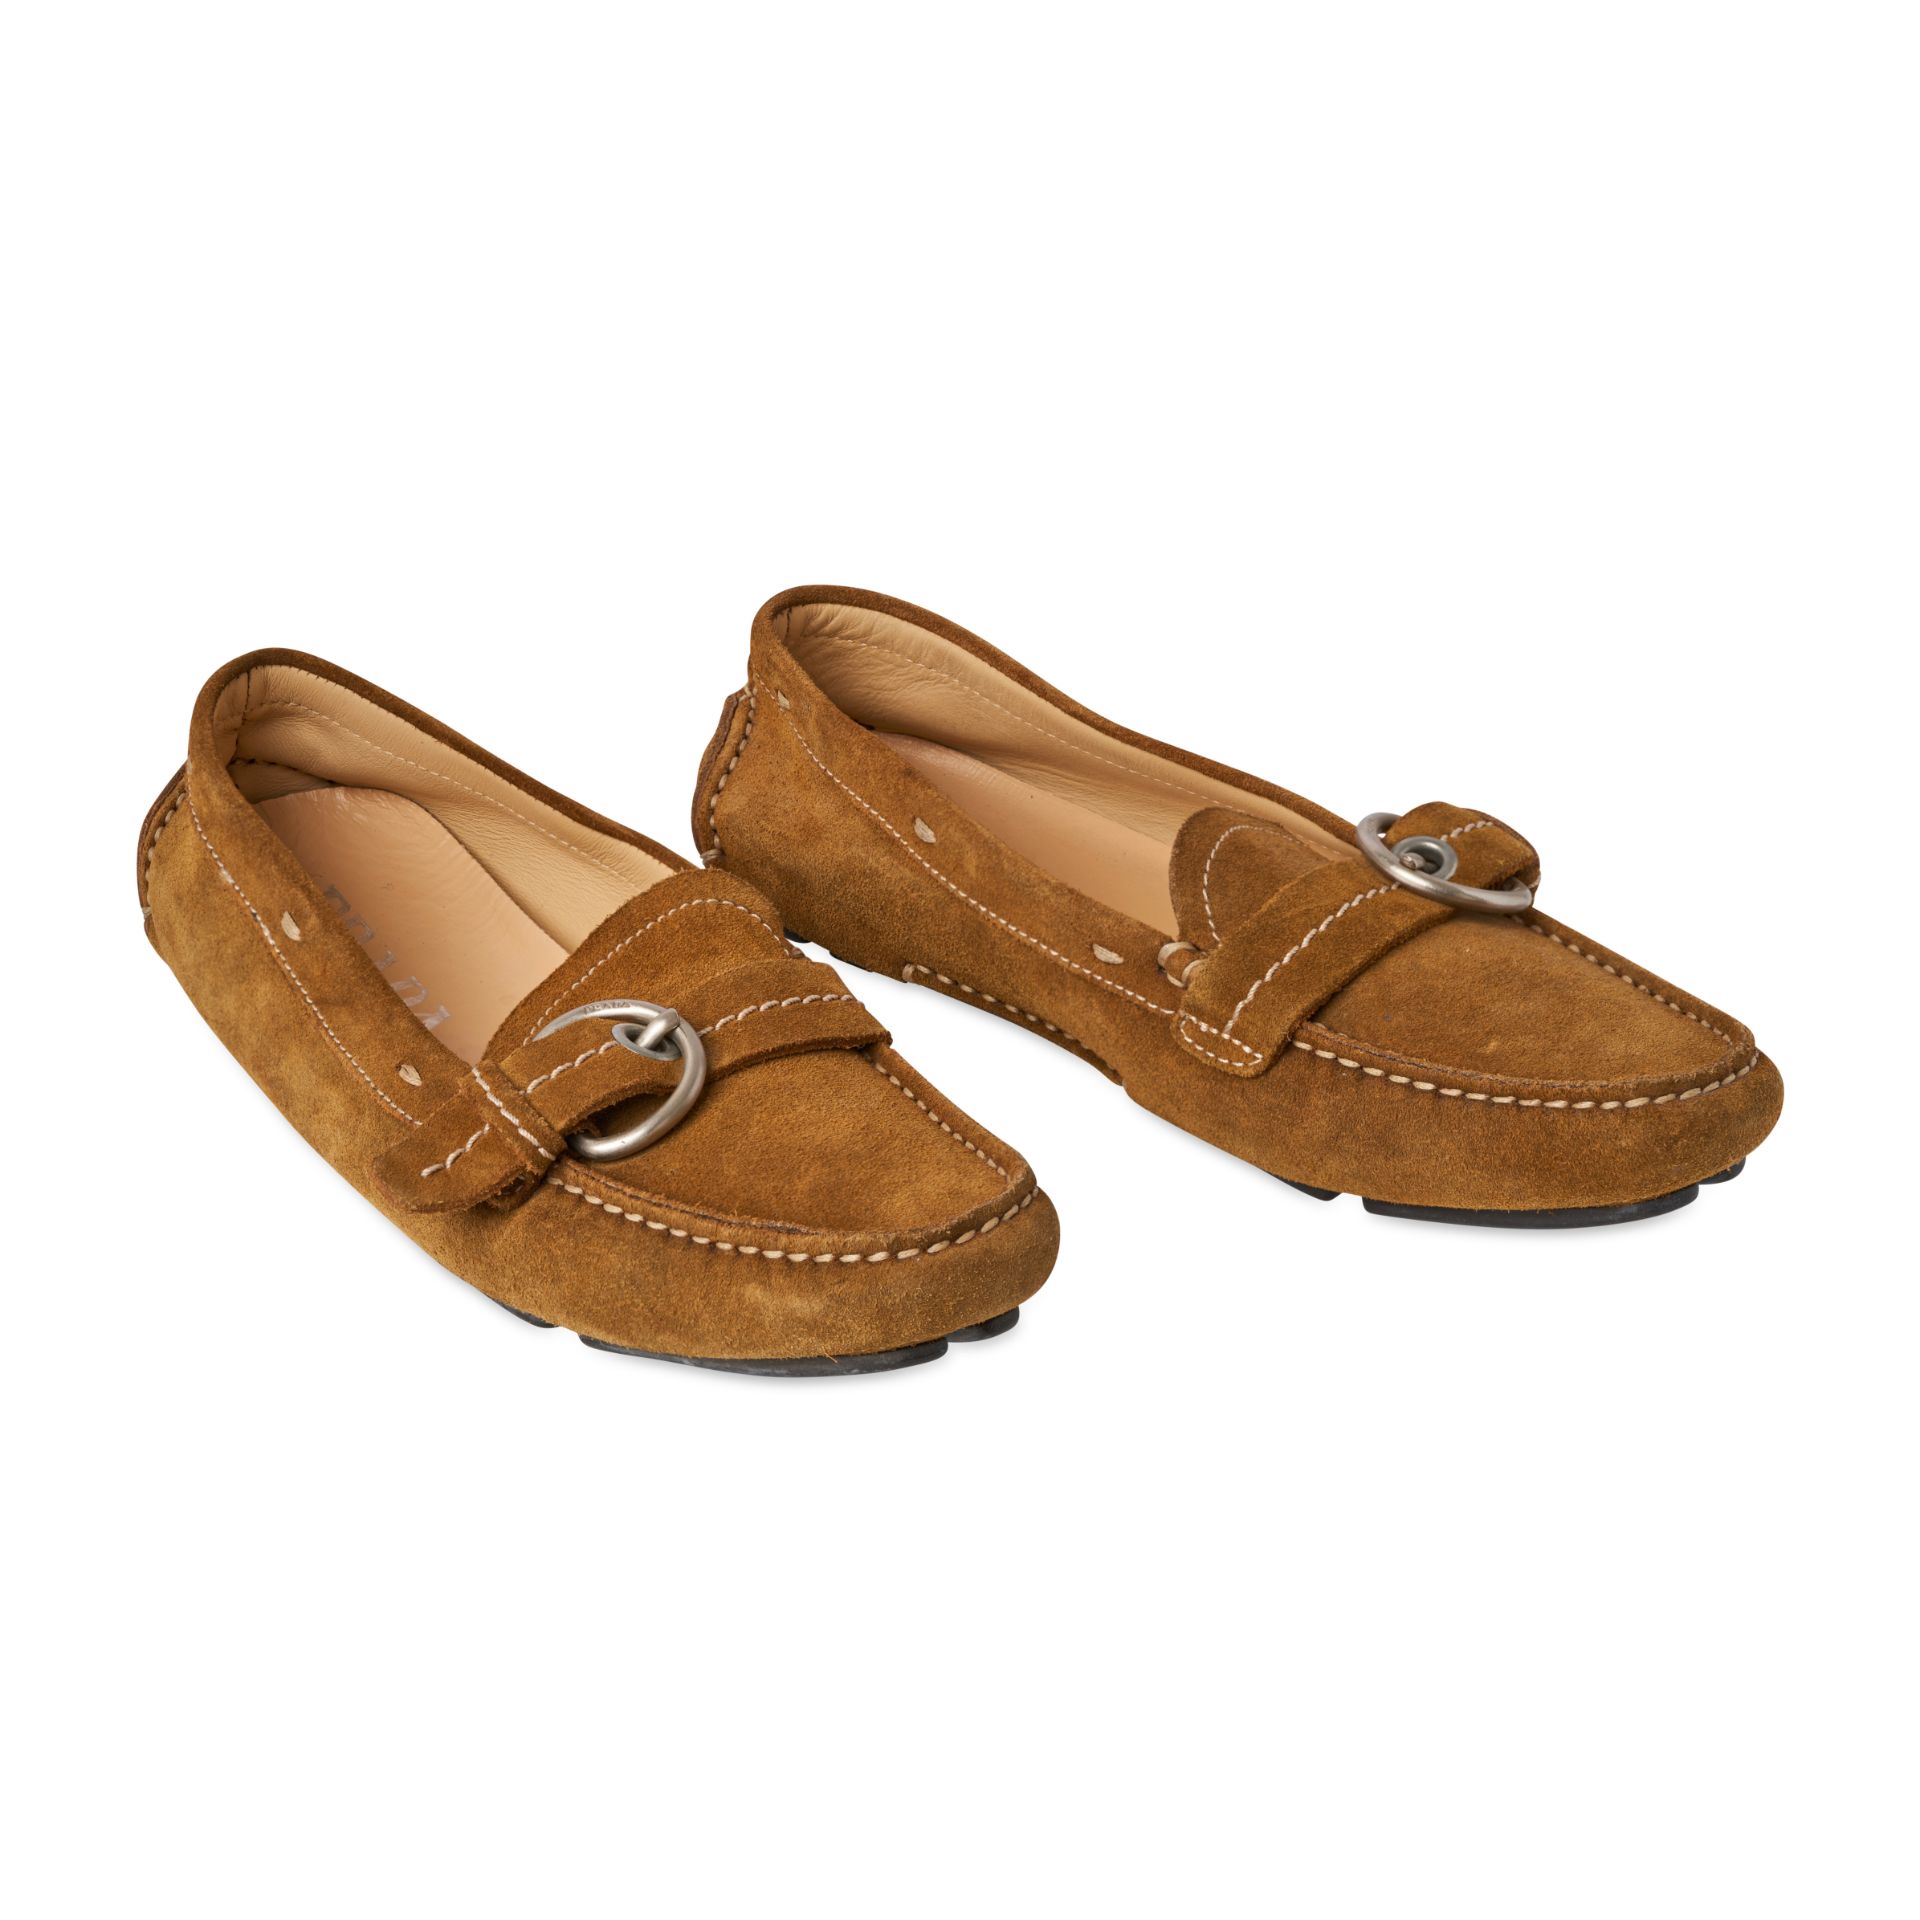 PRADA TAN SUEDE BUCKLED LOAFERS Condition grade C+. Size 35.5. Brown toned suede loafers with b...